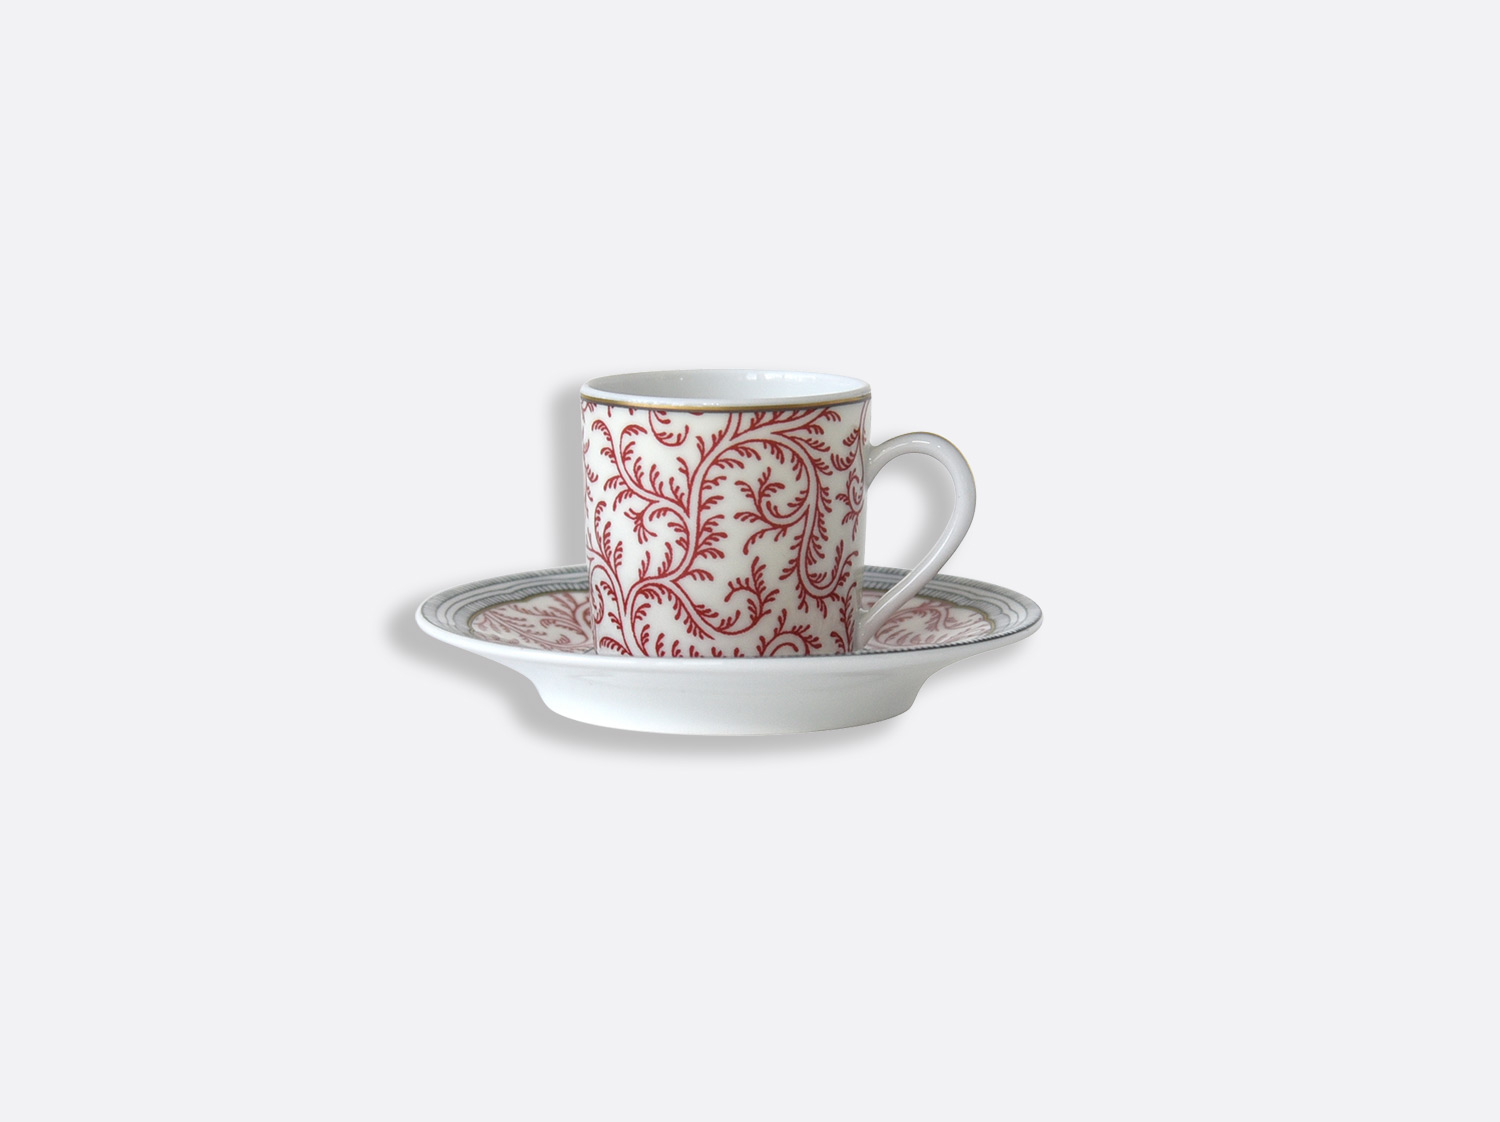 China per unit of the collection Collection Braquenié | Bernardaud